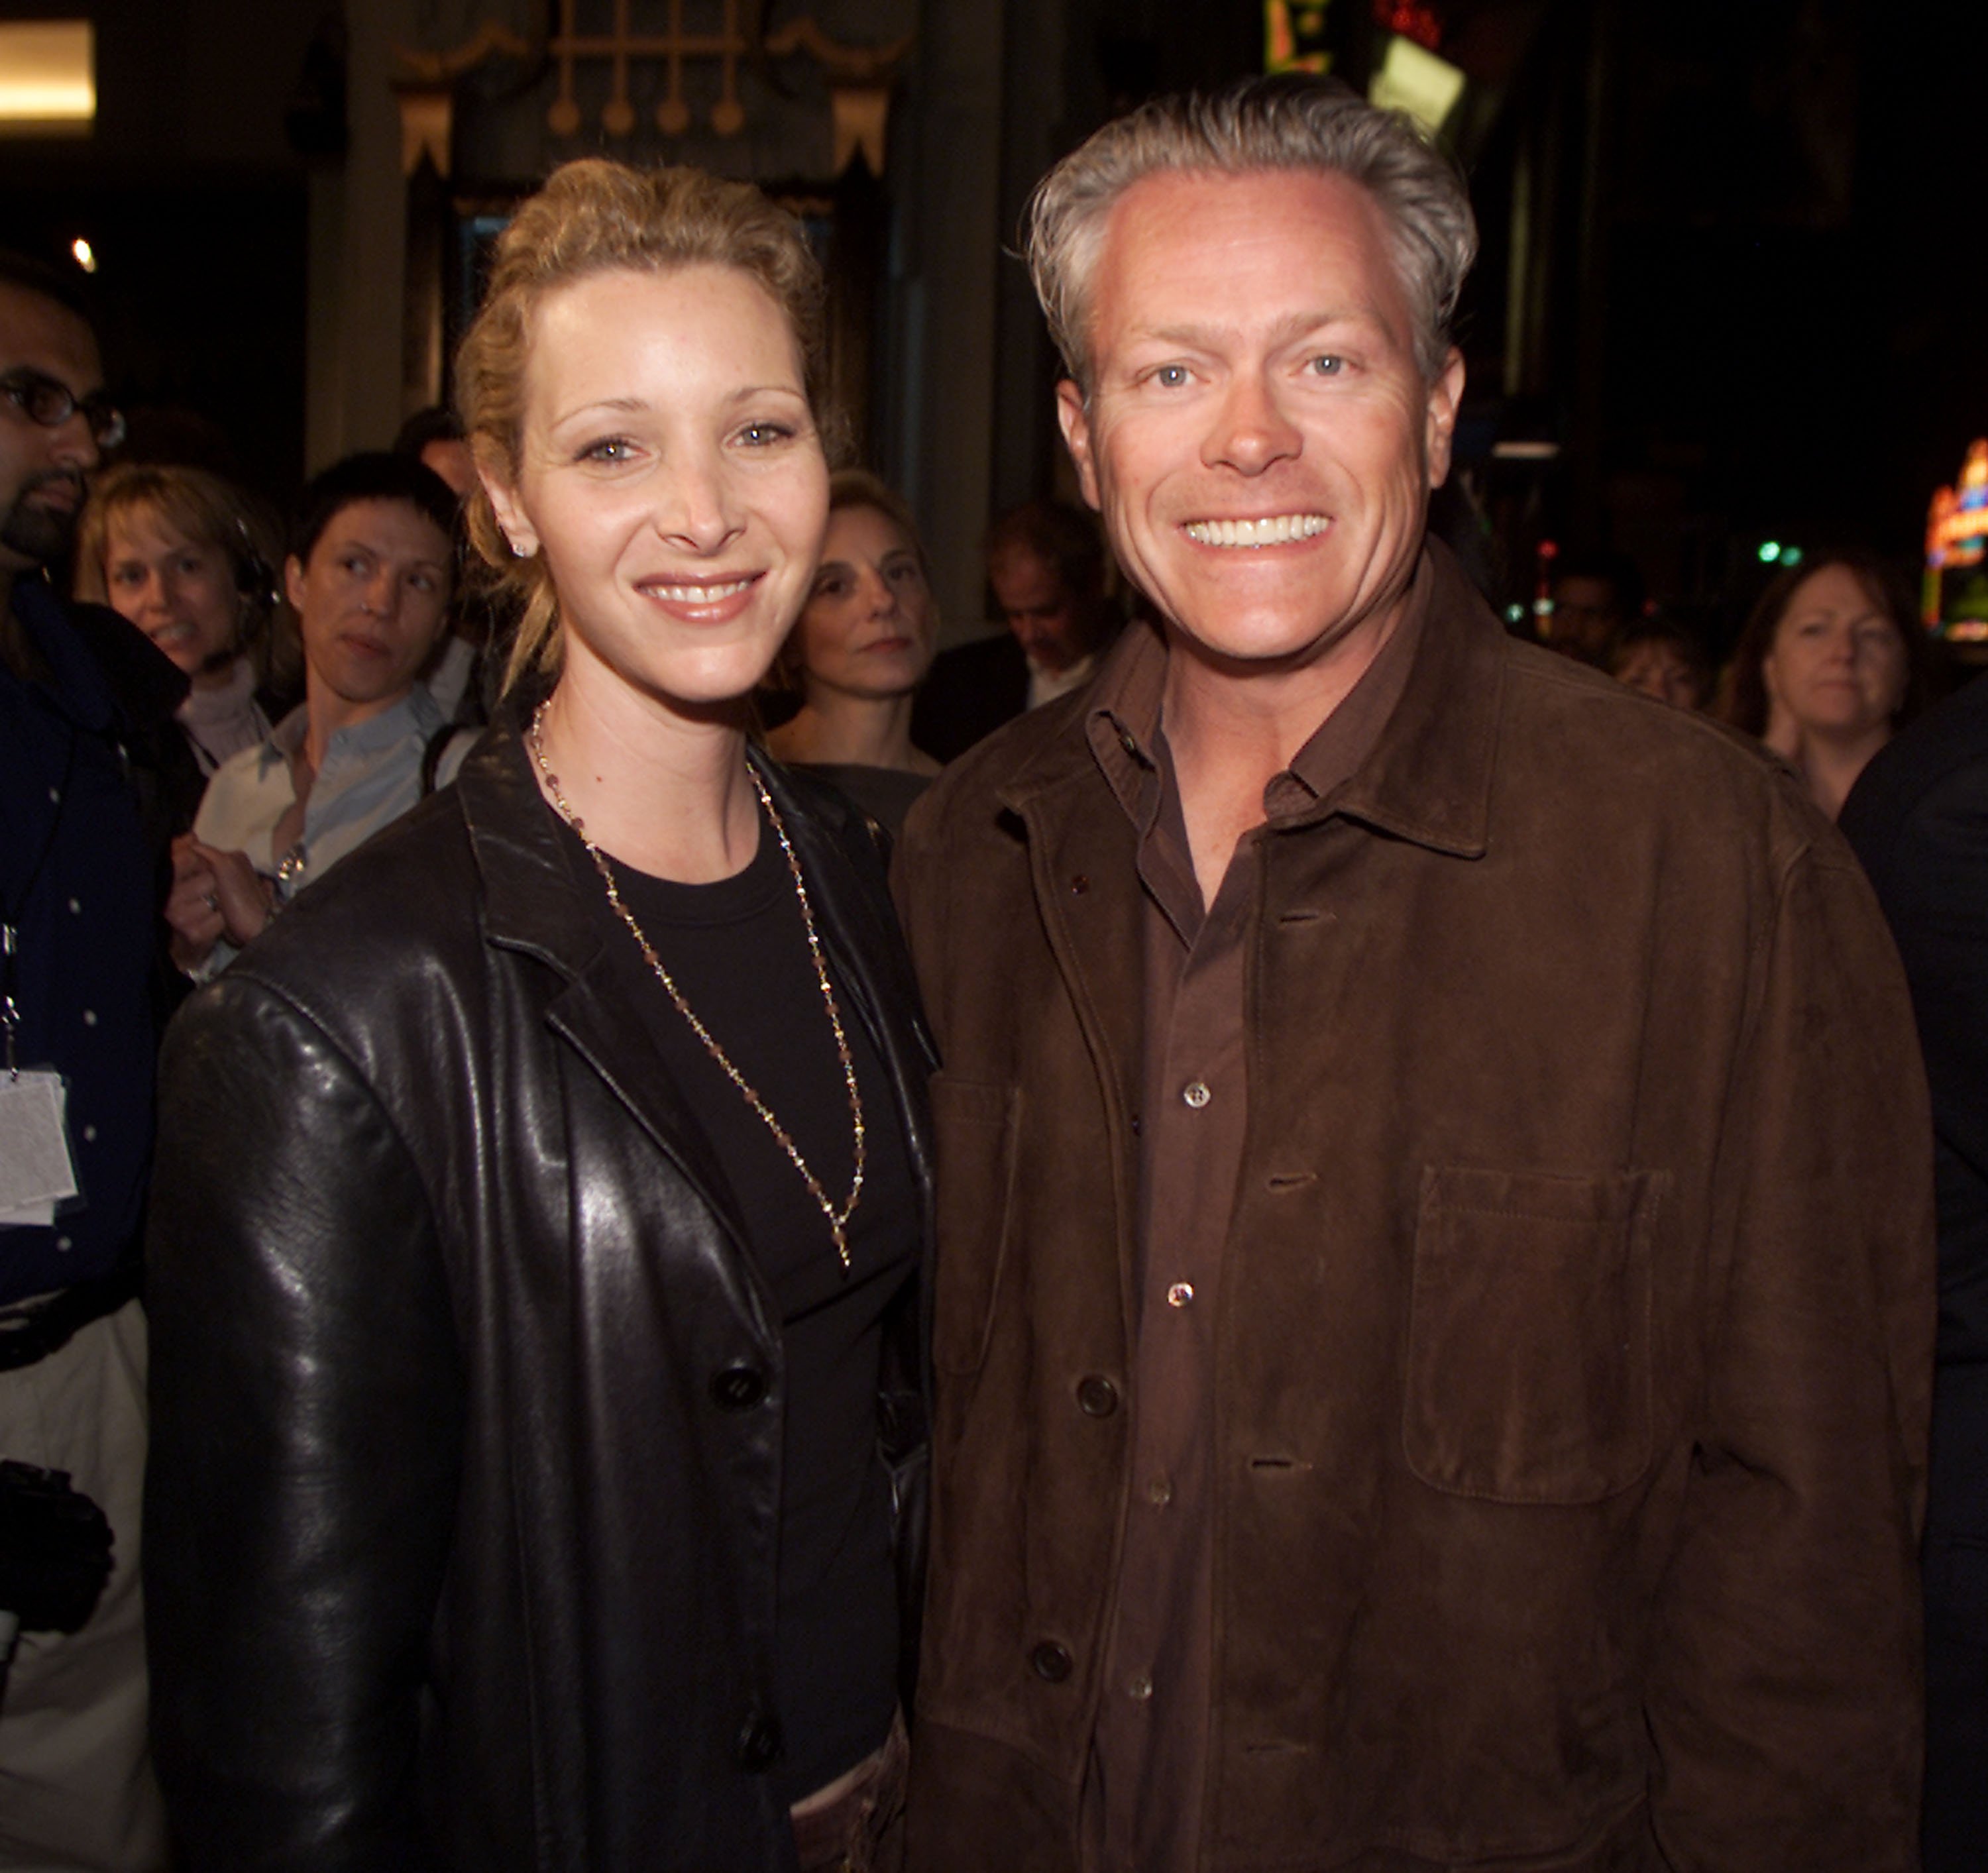 Lisa Kudrow and Michel Stern in Los Angeles, Ca. Monday, March 11, 2002. | Source: Getty Images